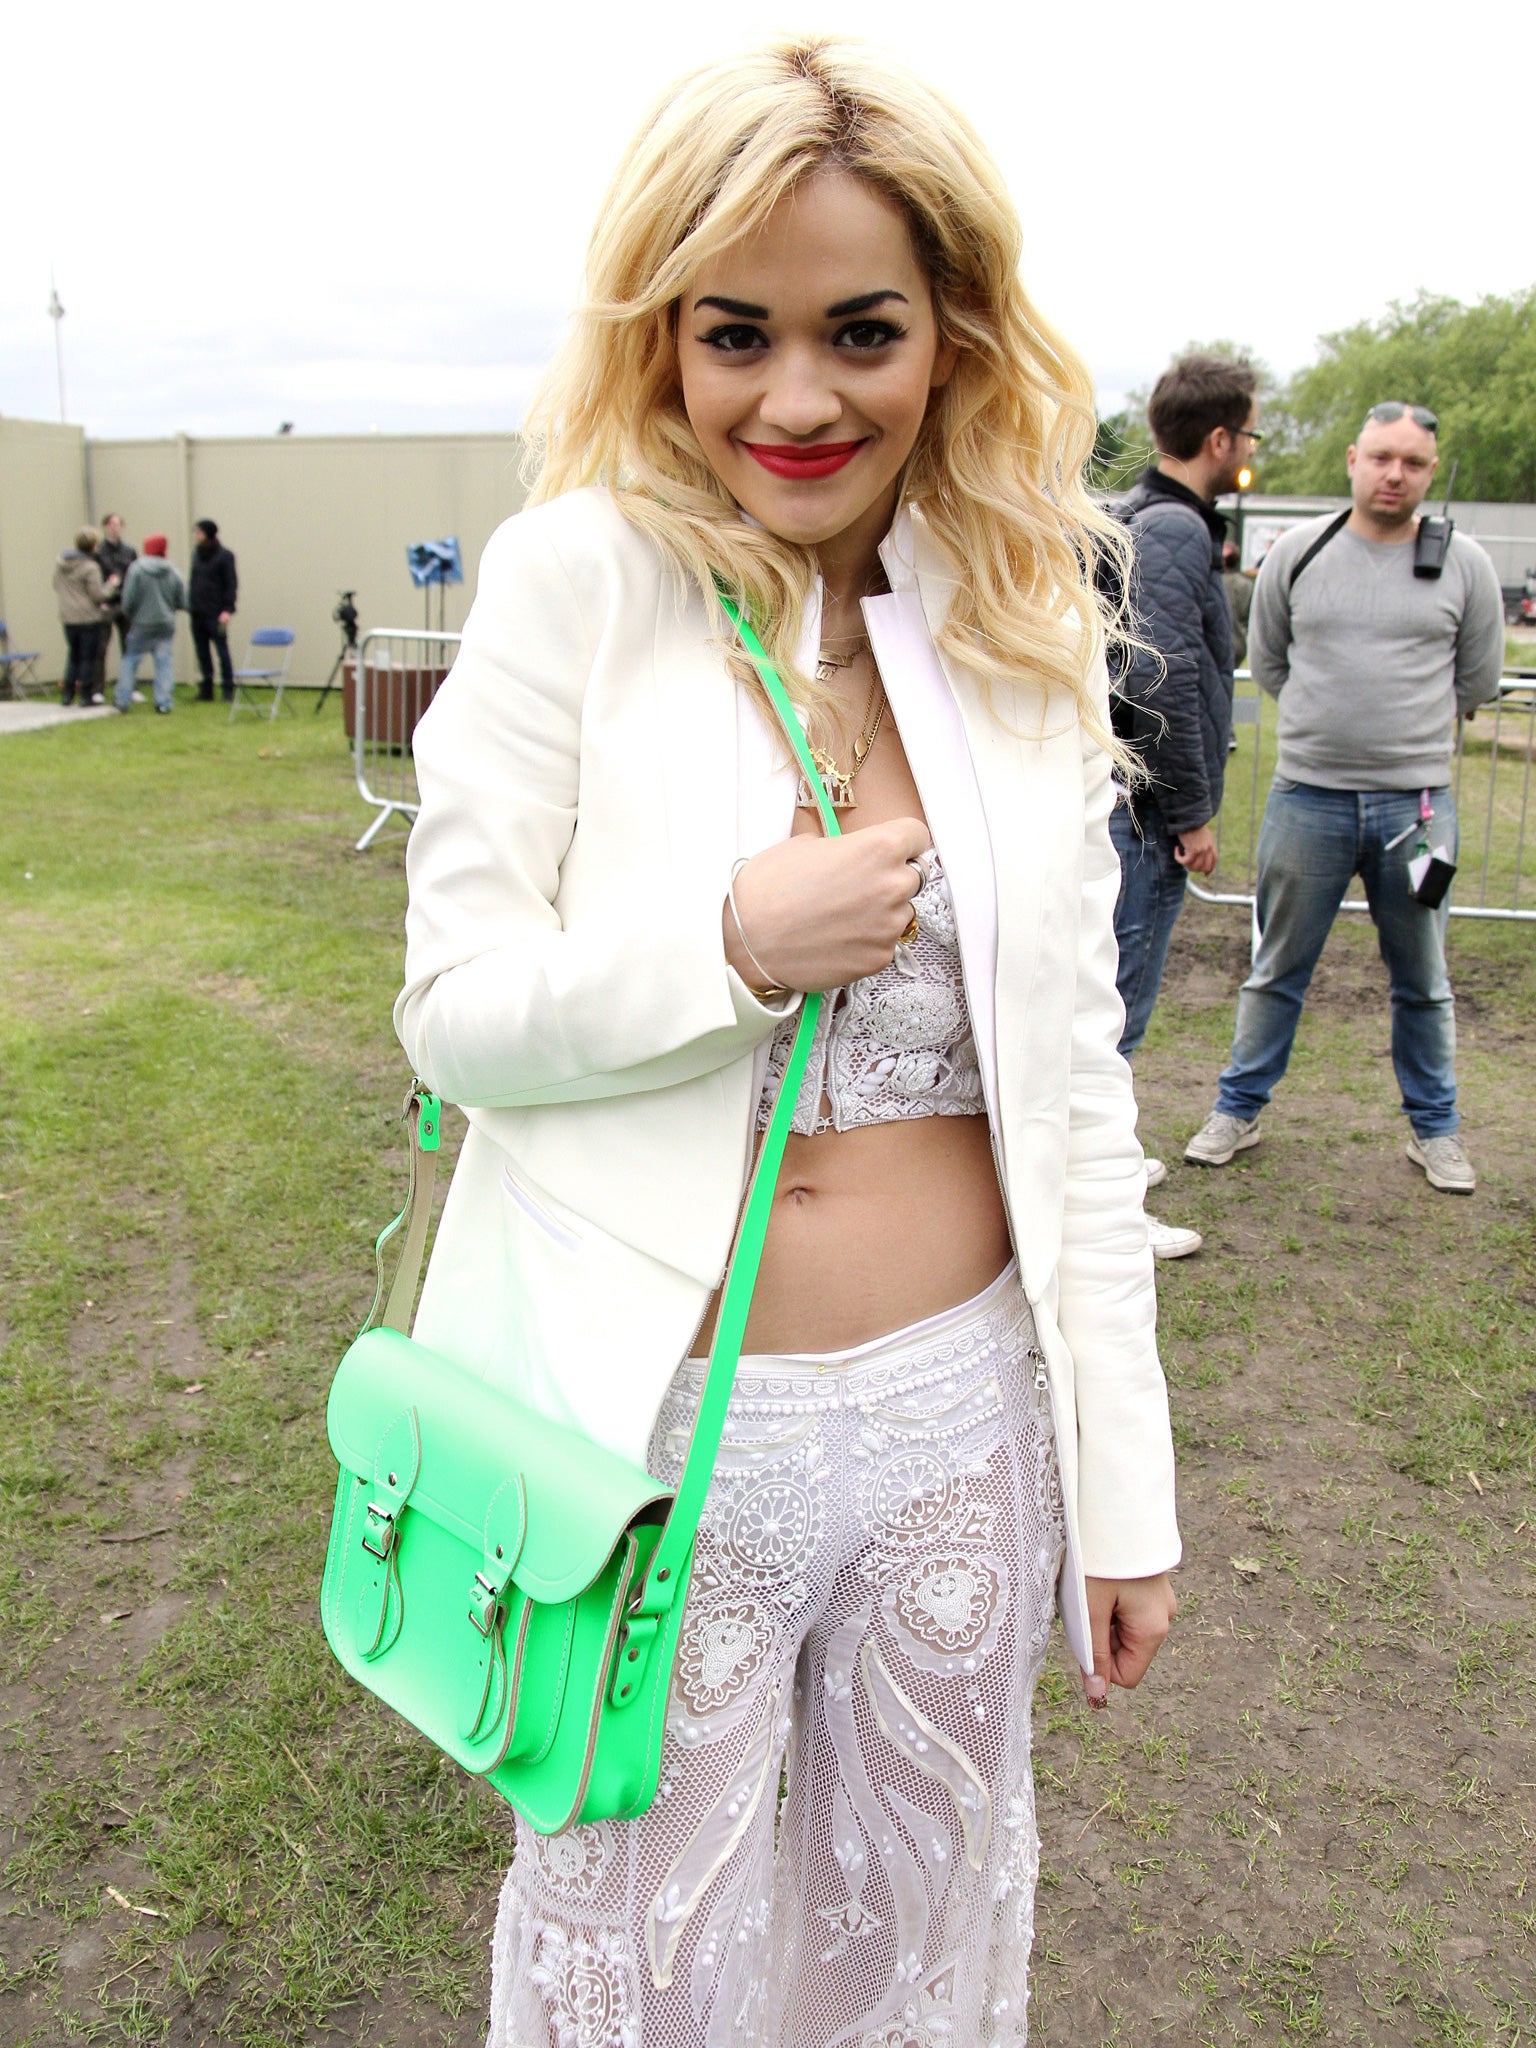 Pop star Rita Ora with her satchel which is available in various colours and sizes from £94 cambridgesatchel.co.uk,
15 Shorts Garden, London WC2.